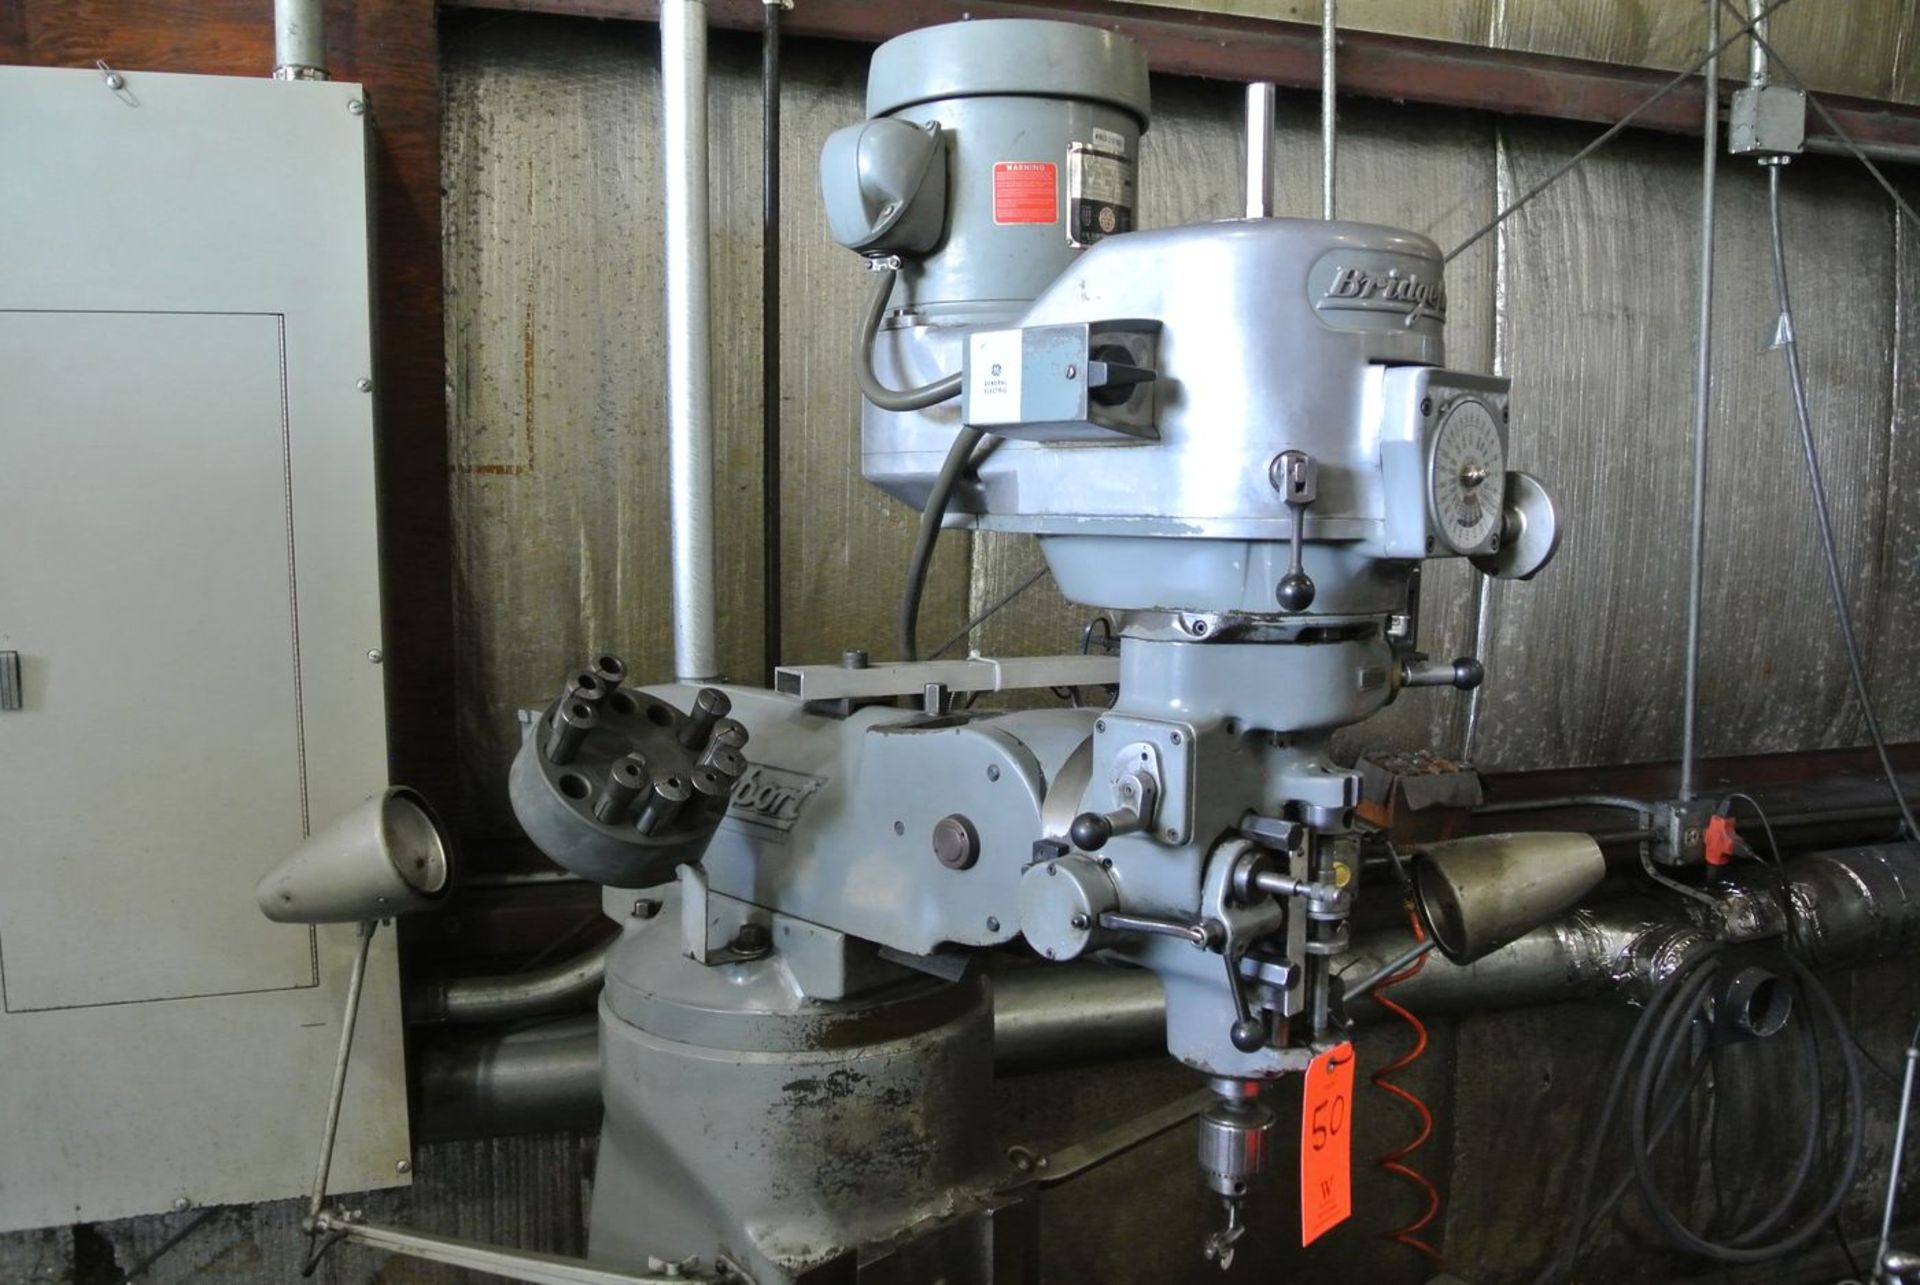 Bridgeport 1-1/2 HP Vertical Milling Machine, S/N: 12BR163788; with 42 in. x 9 in. T-Slot Production - Image 3 of 6